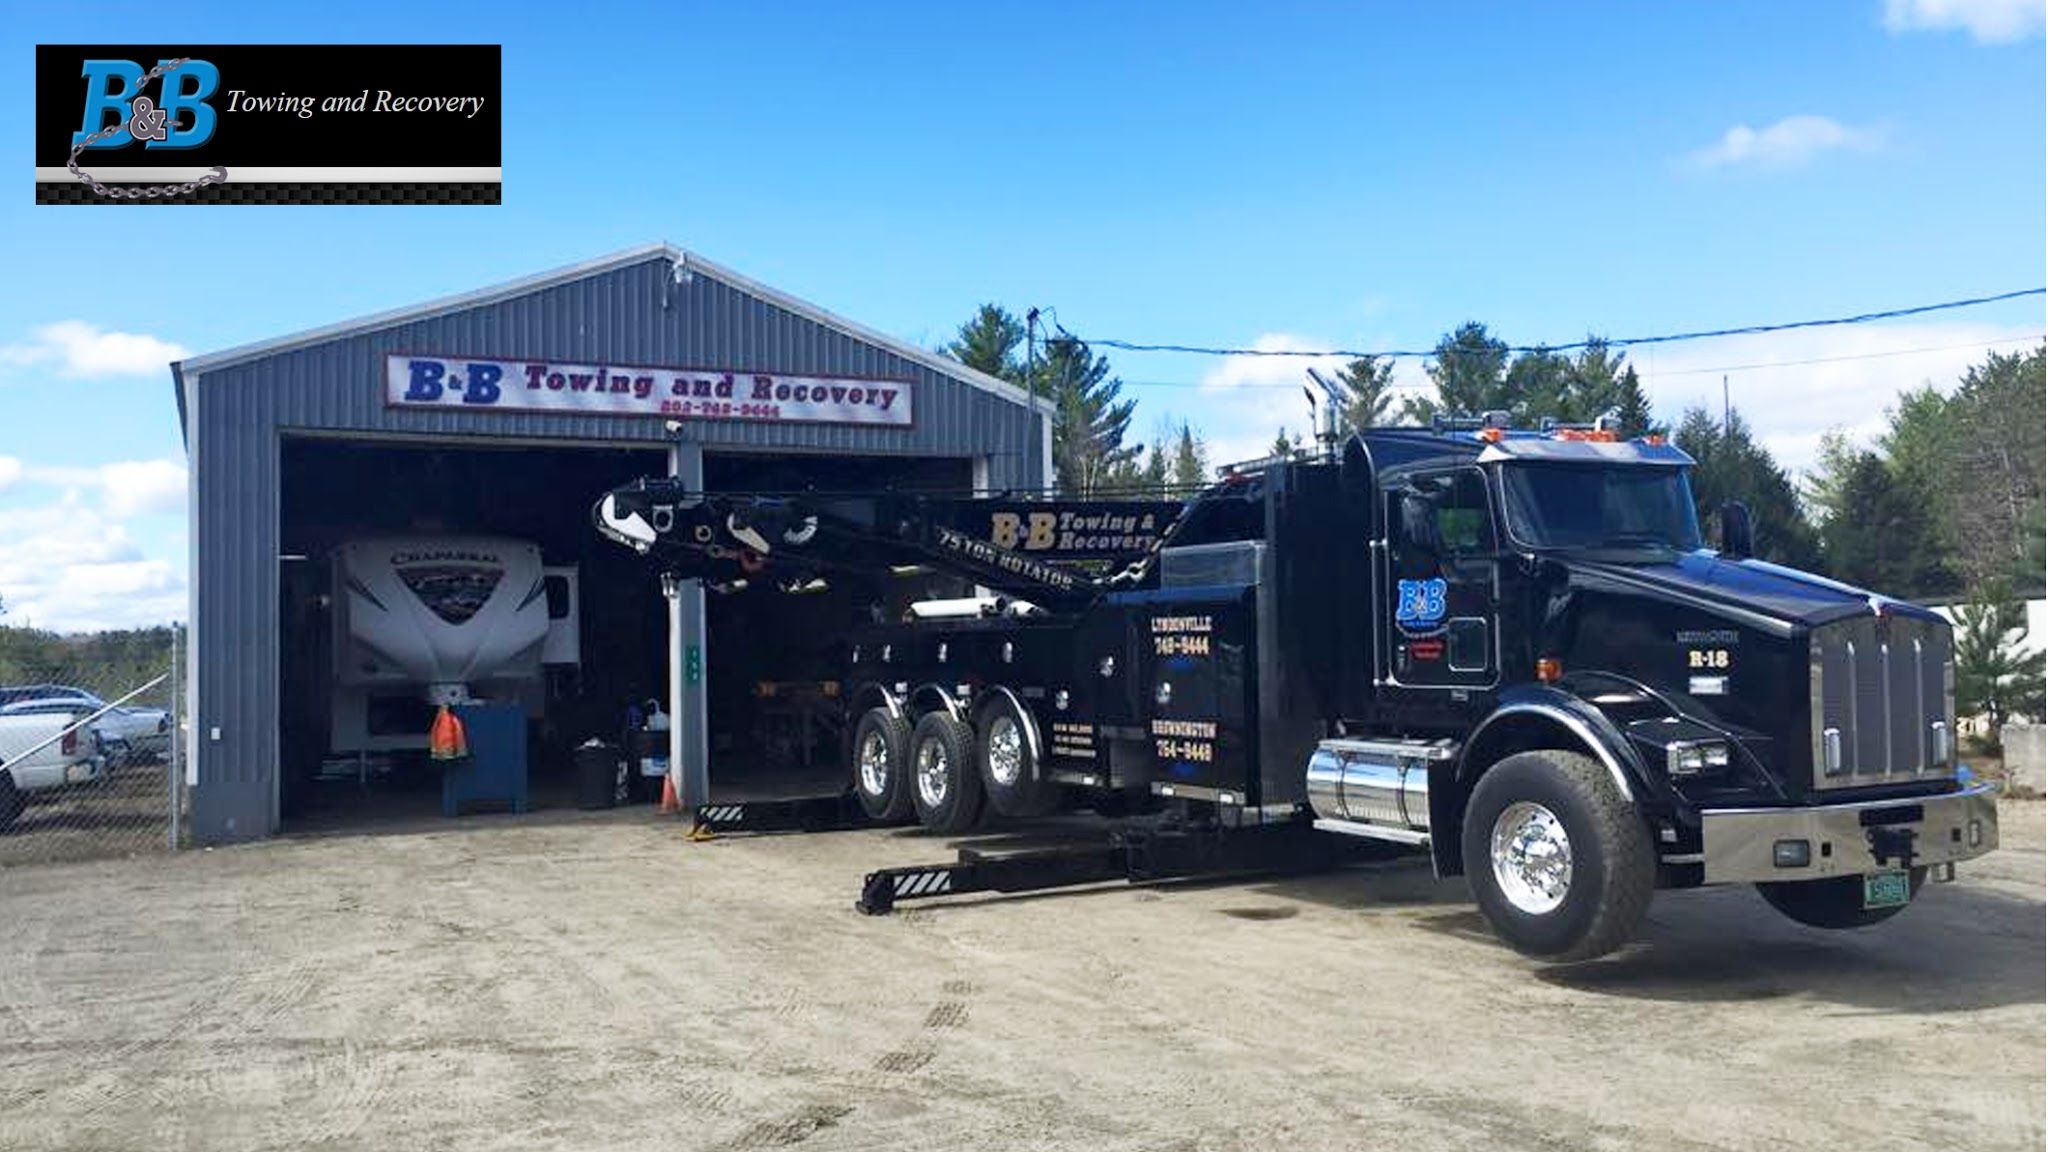 Services & Products B&B Towing and Recovery in Brownington VT